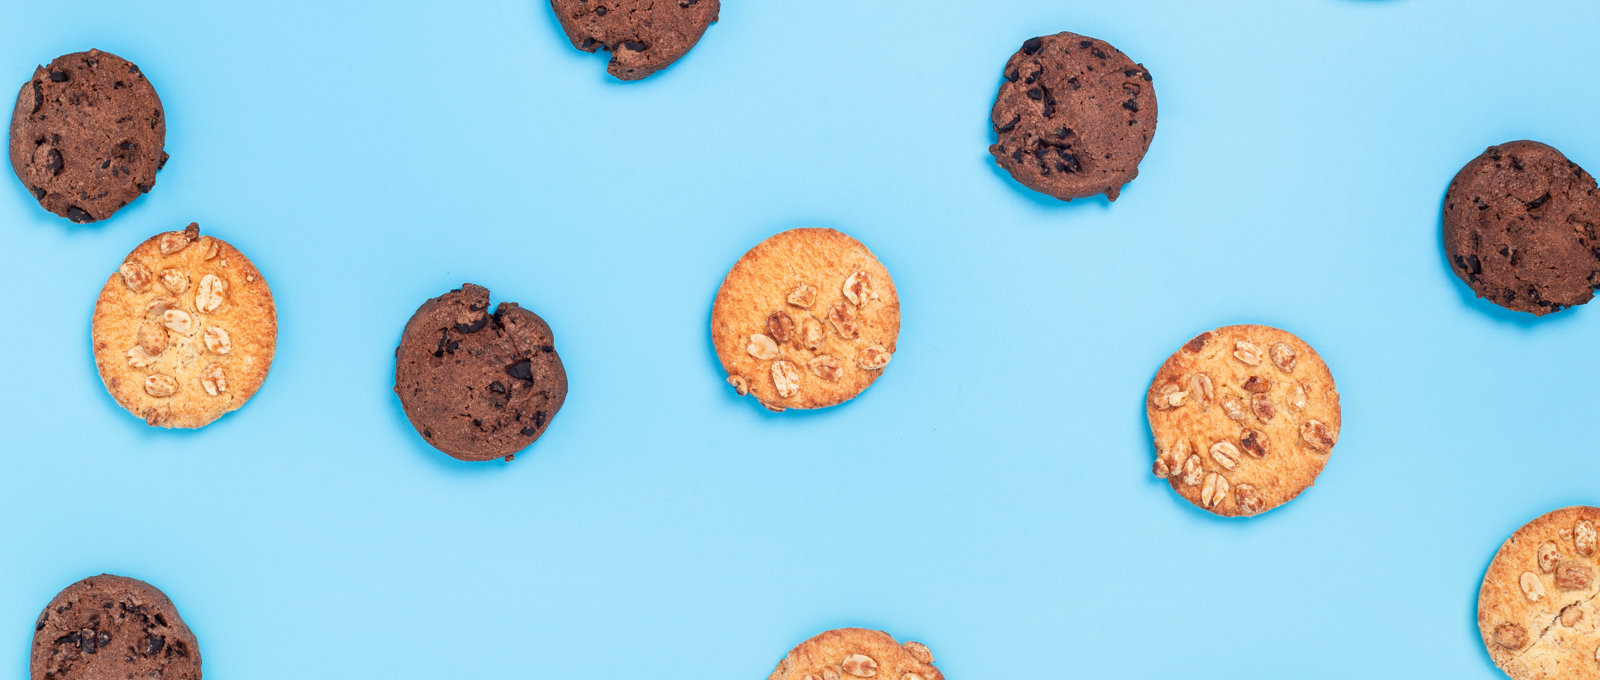 Photograph of different kinds of cookies on a blue surface